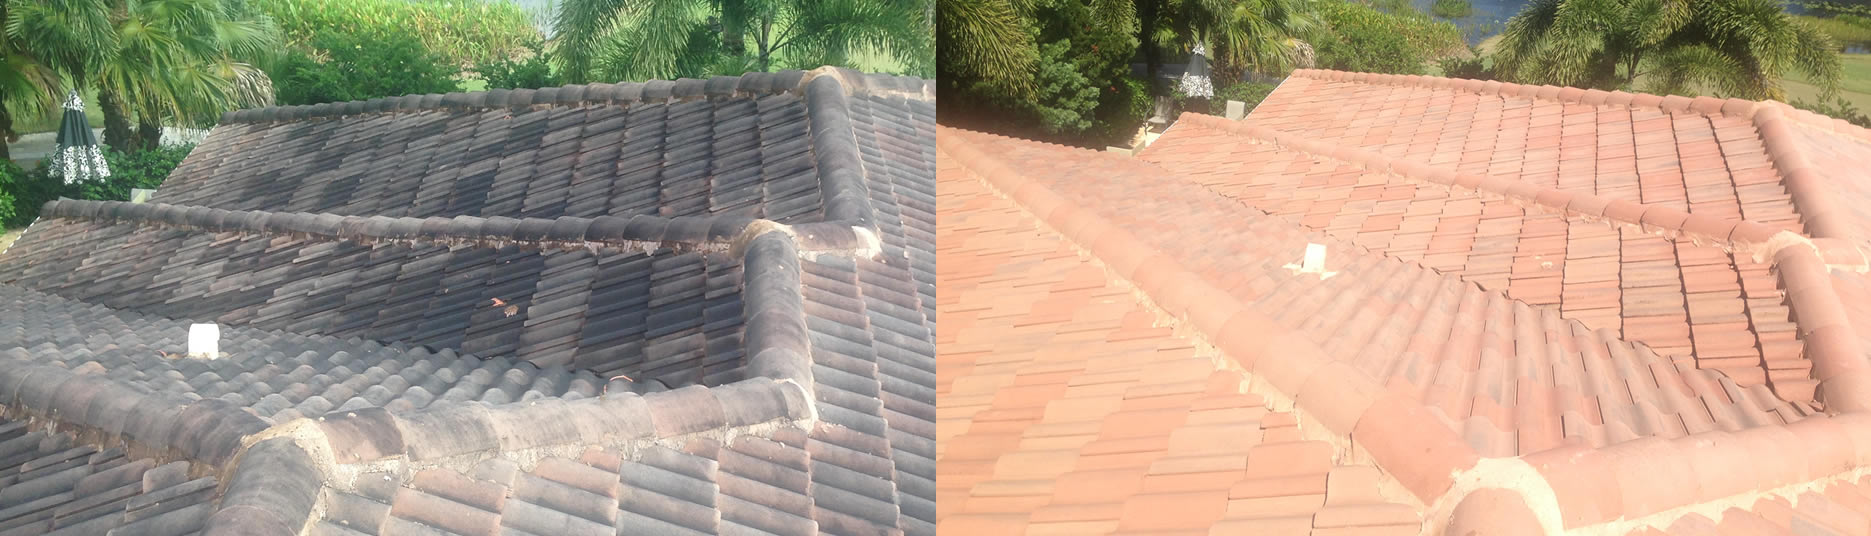 Coral Springs Roof Cleaning – Be Smart and Choose Fiddler!